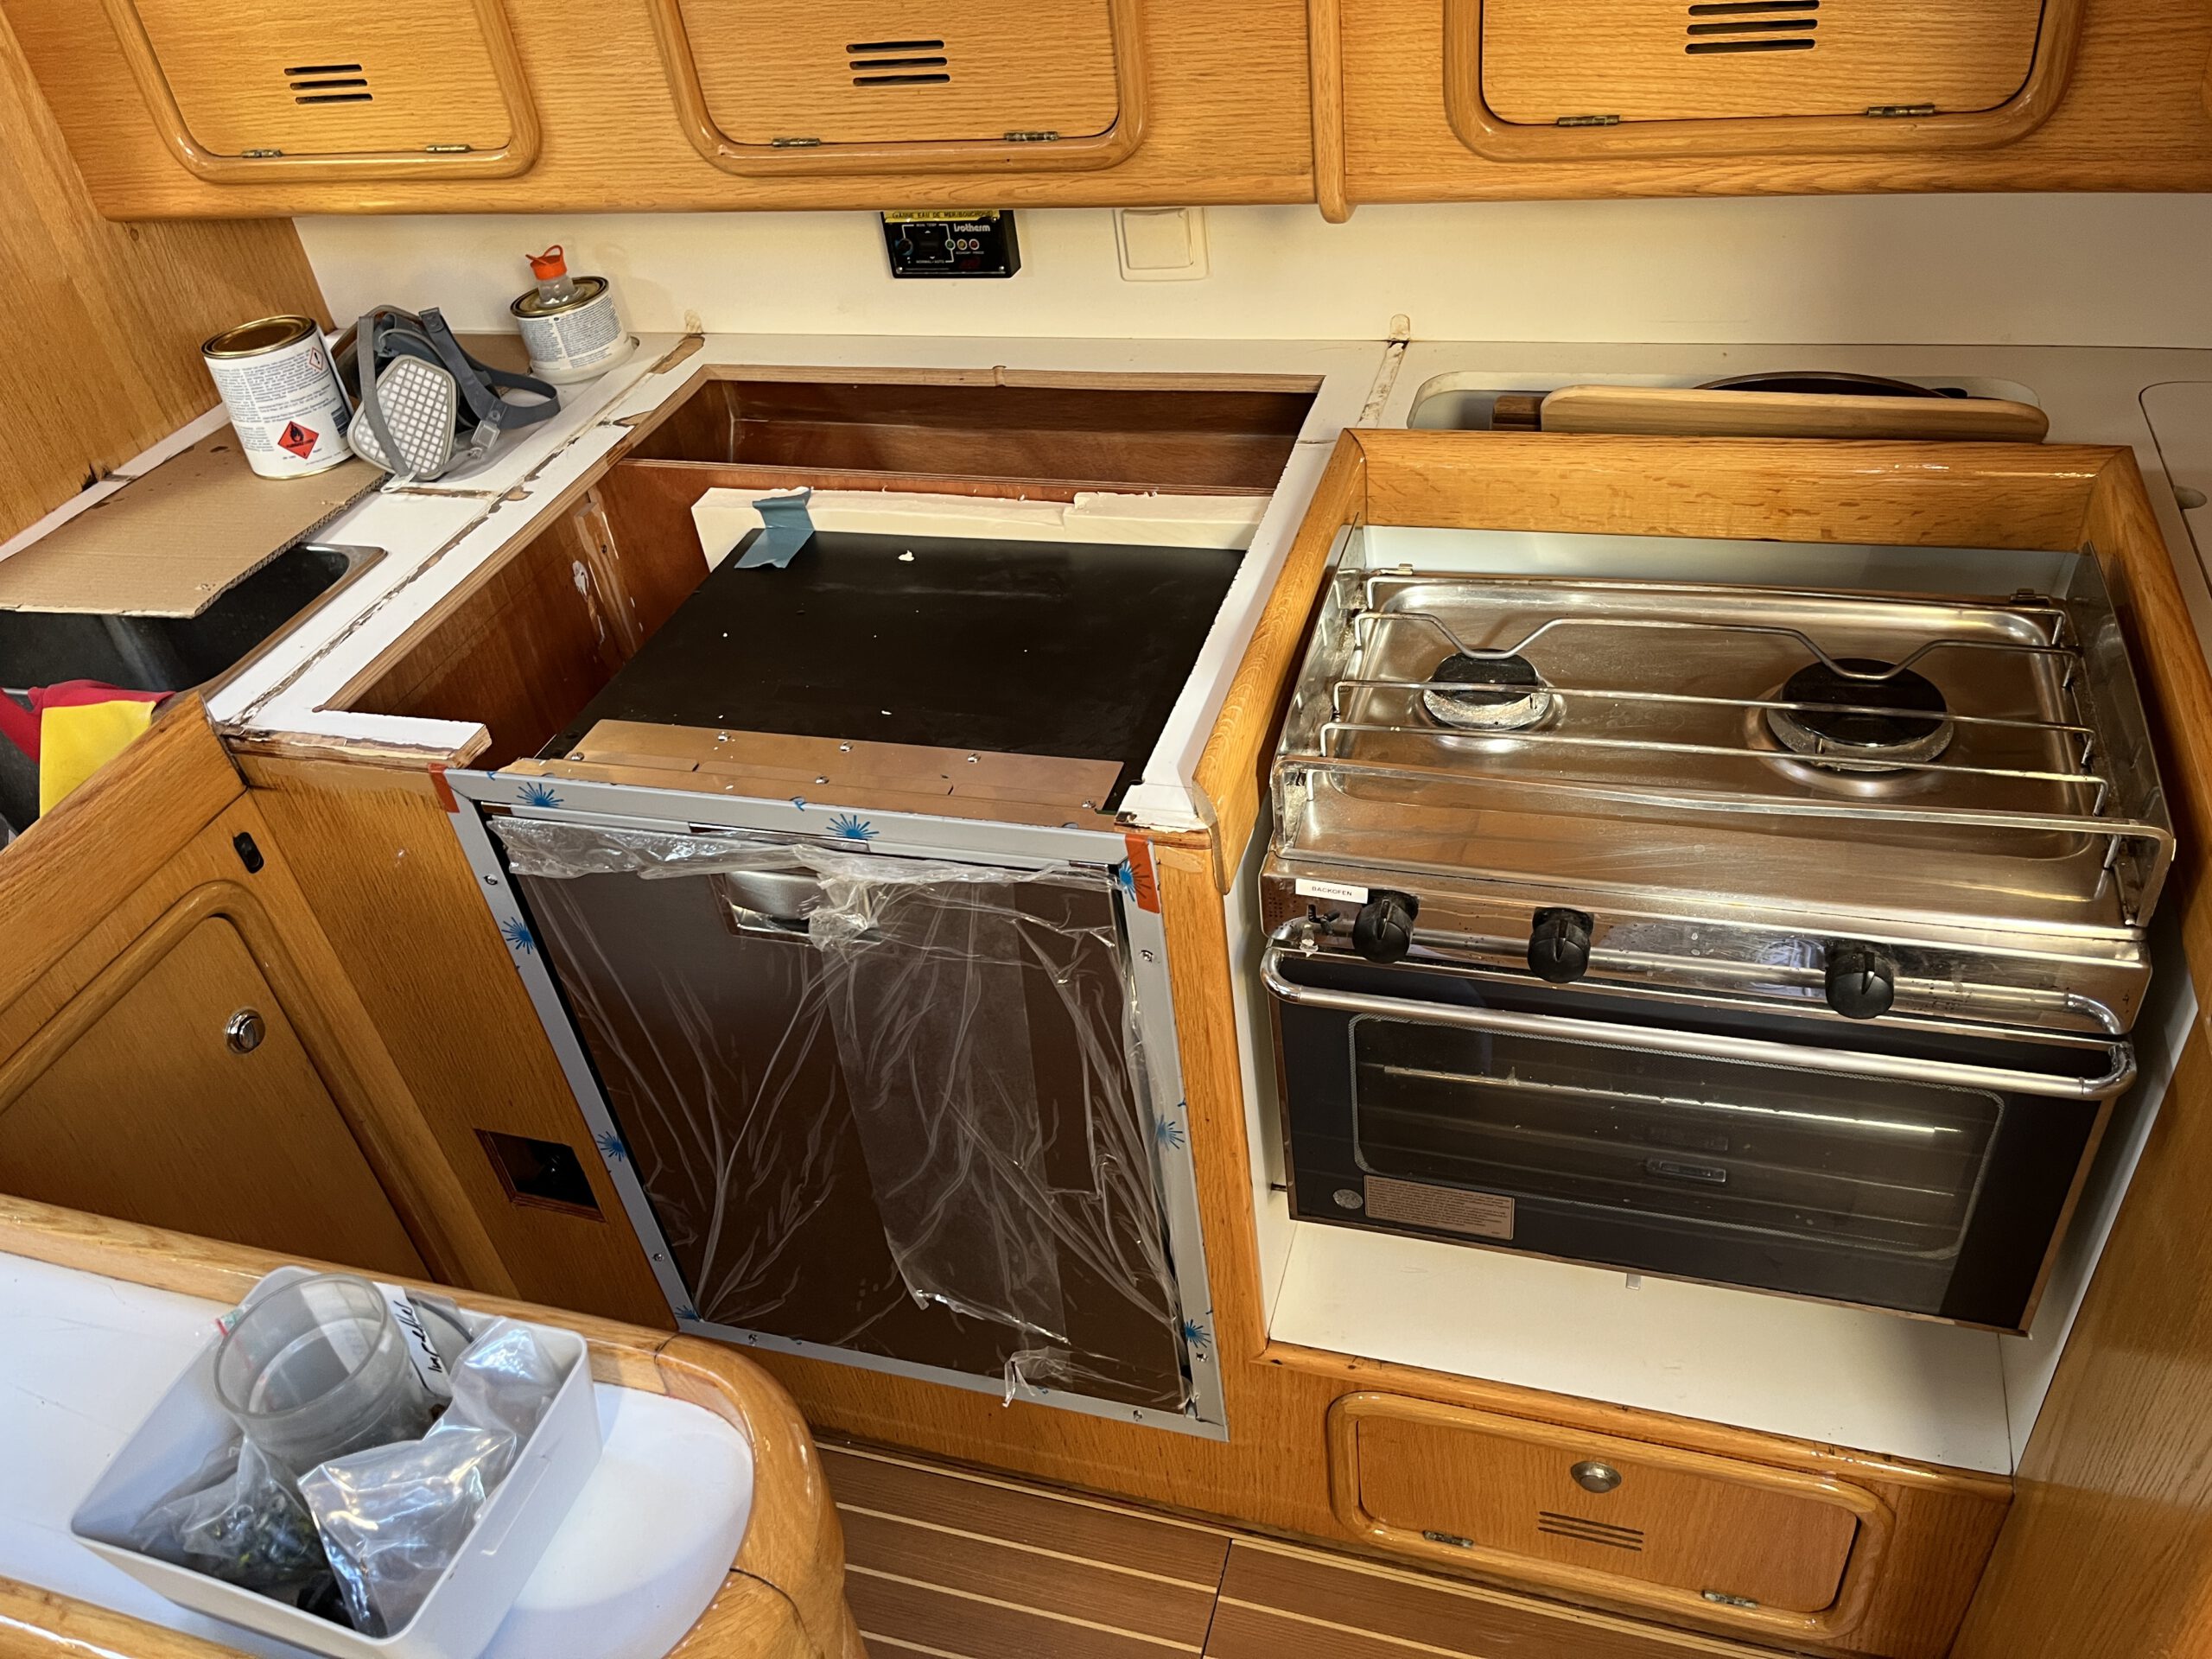 You are currently viewing Upgrading a Toploader Fridge to a Drawer Fridge: A Step-by-Step Guide for Boat Owners (from experience on my Alubat Ovni 435)⛵🪚